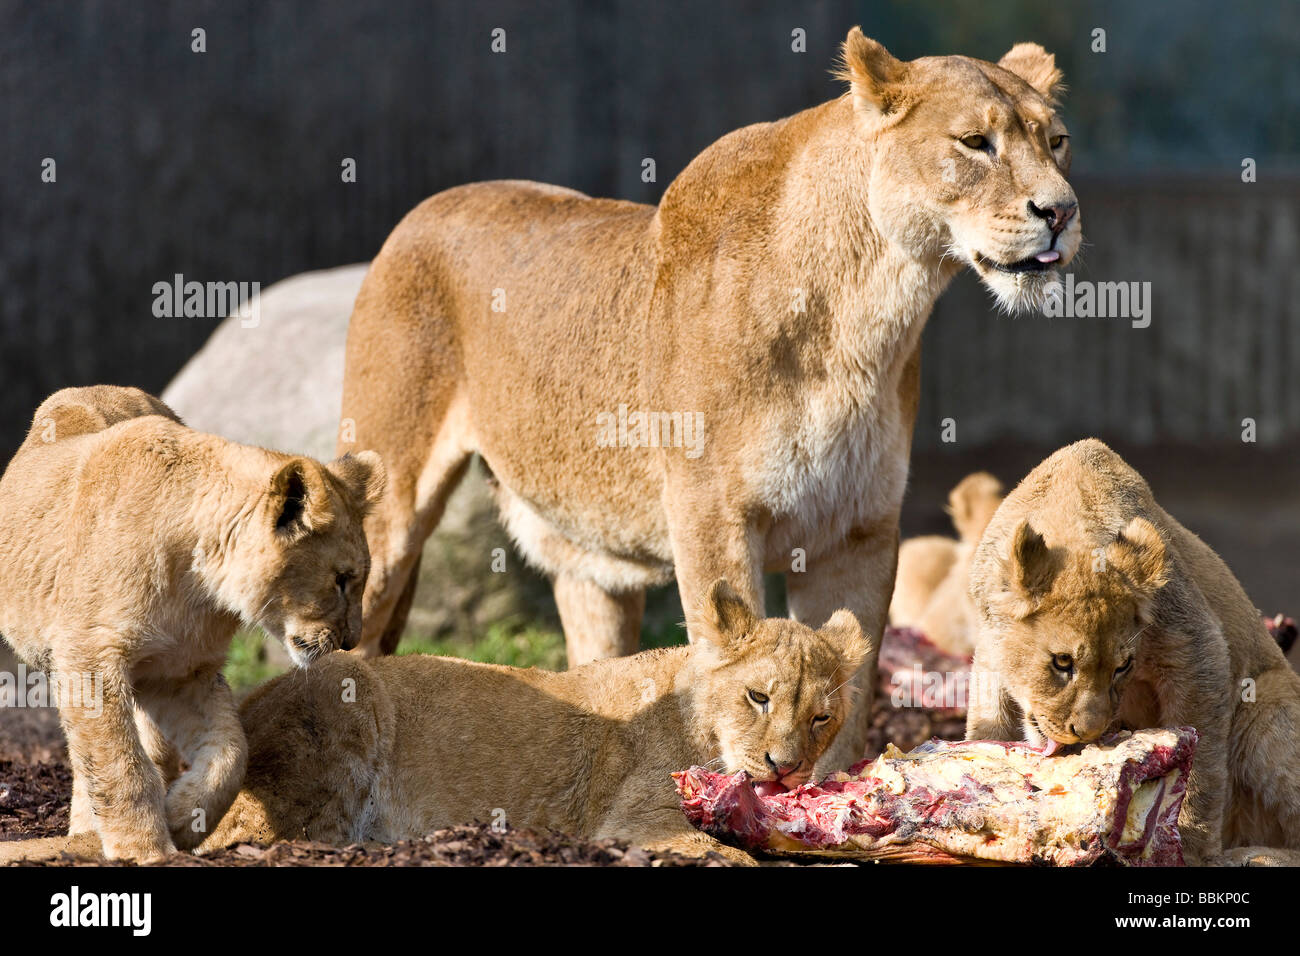 Dinner time for a female lion and cubs (Panthera leo) Stock Photo